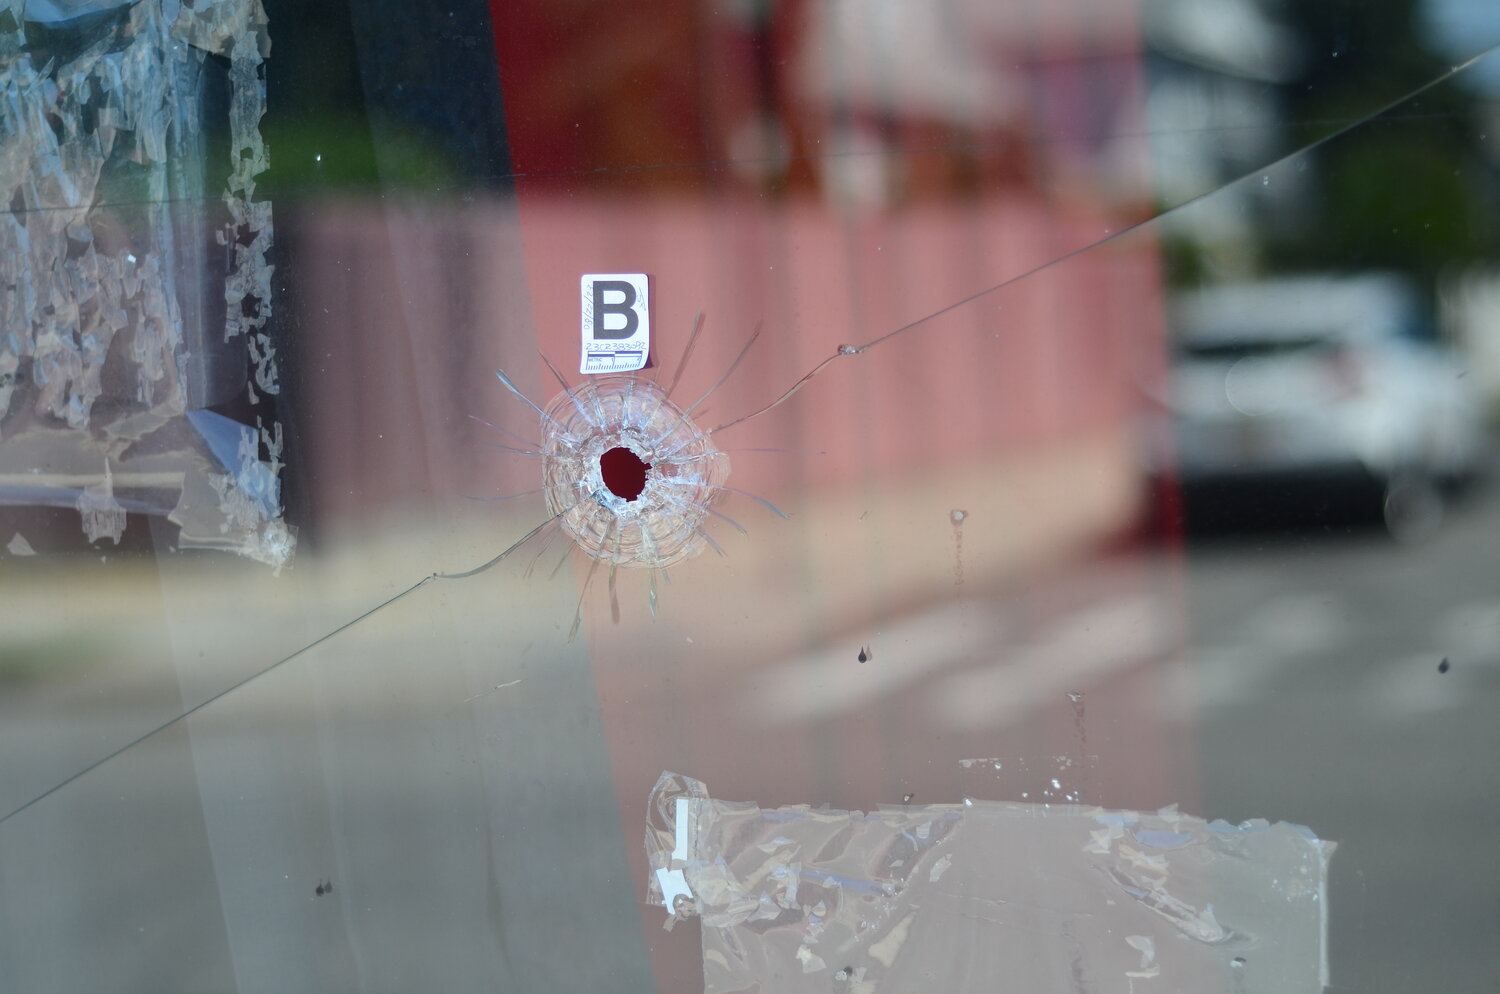 A recent shooting at an illegal party that left one young person dead and four injured has sent shock waves through the village as the neighborhood reckons with an increase in gun violence.